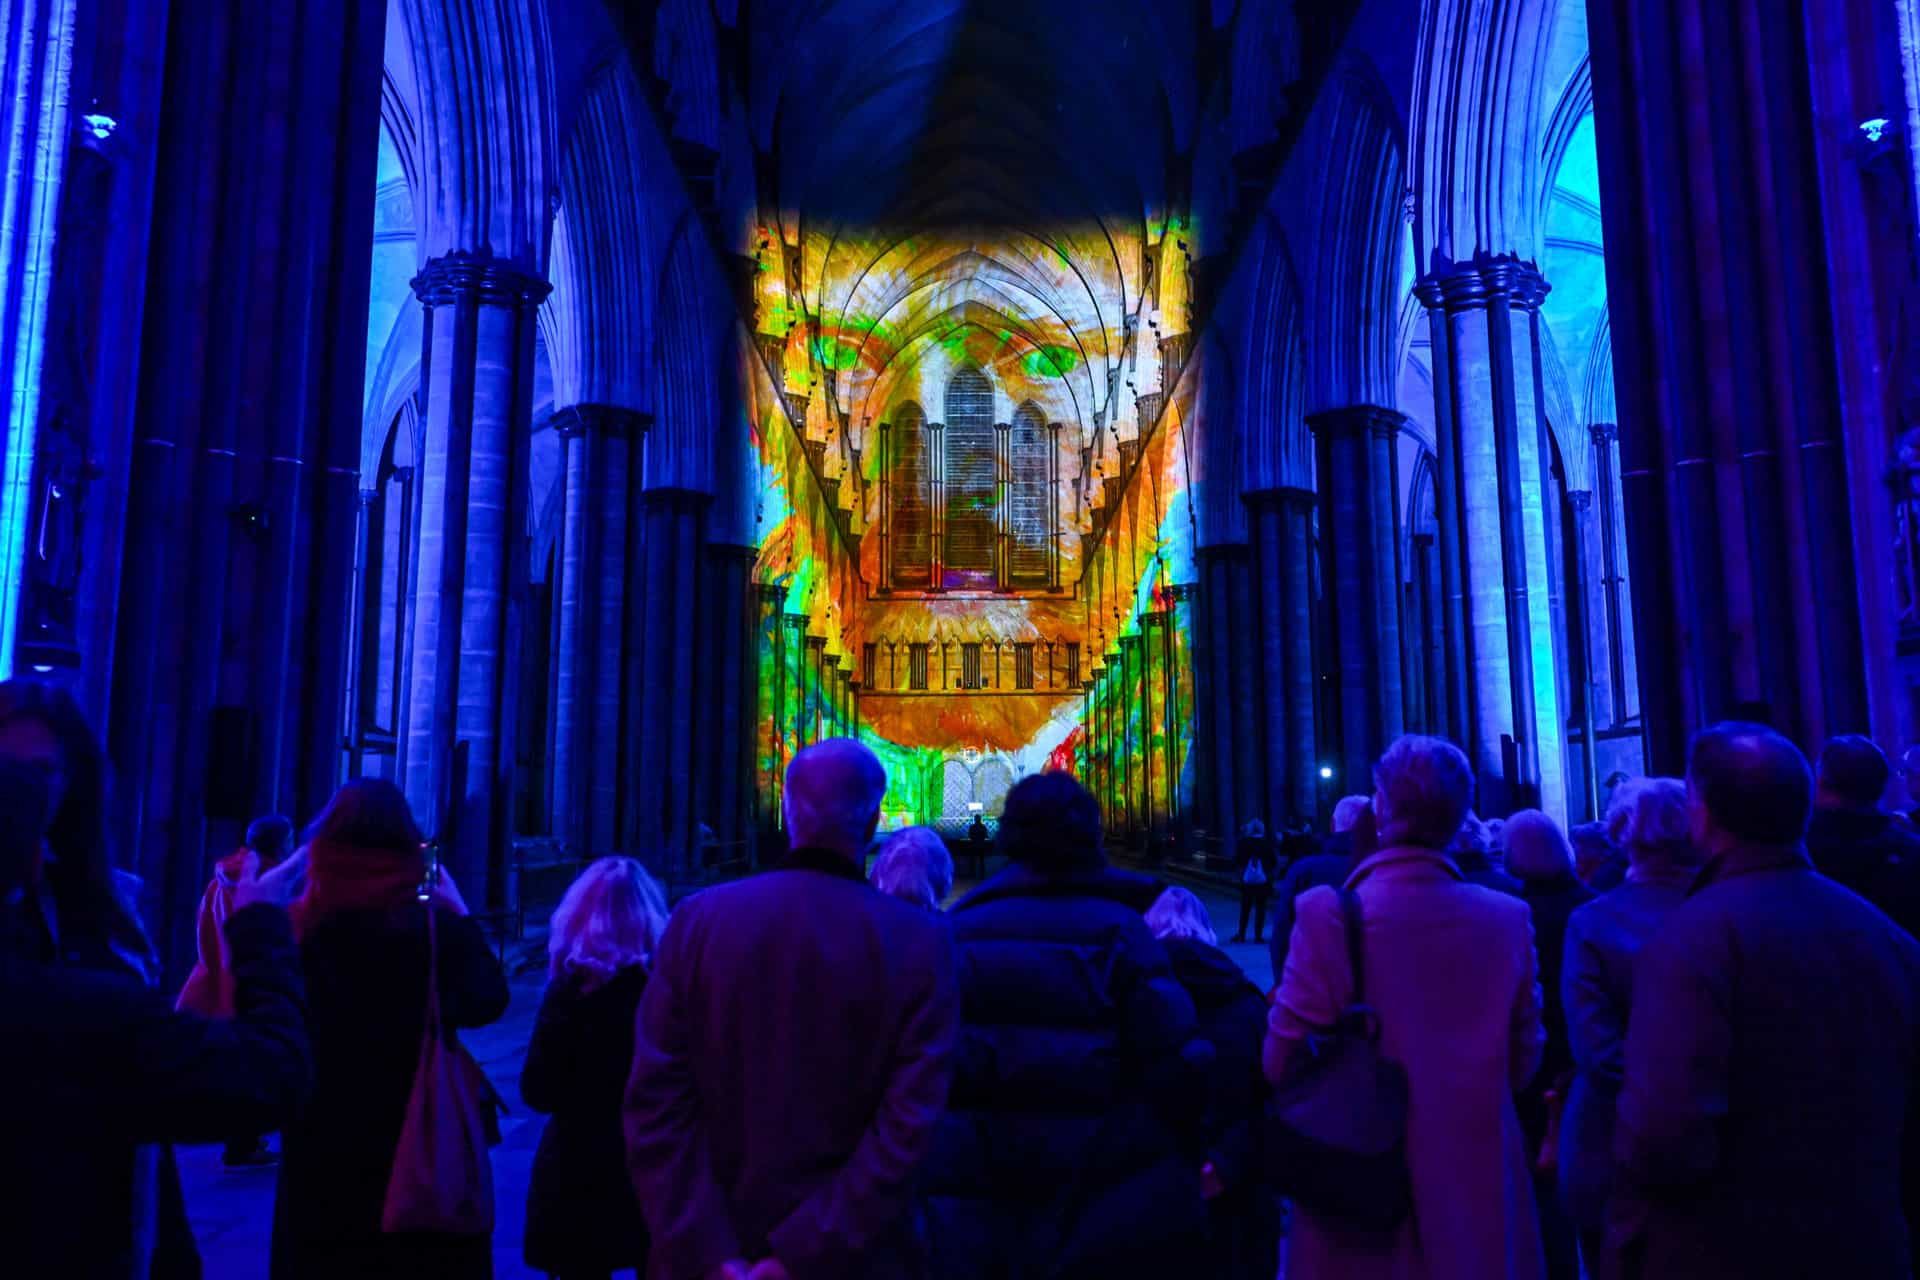 preview of sarum lights: illuminating art by luxmuralis takes place at salisbury cathedral